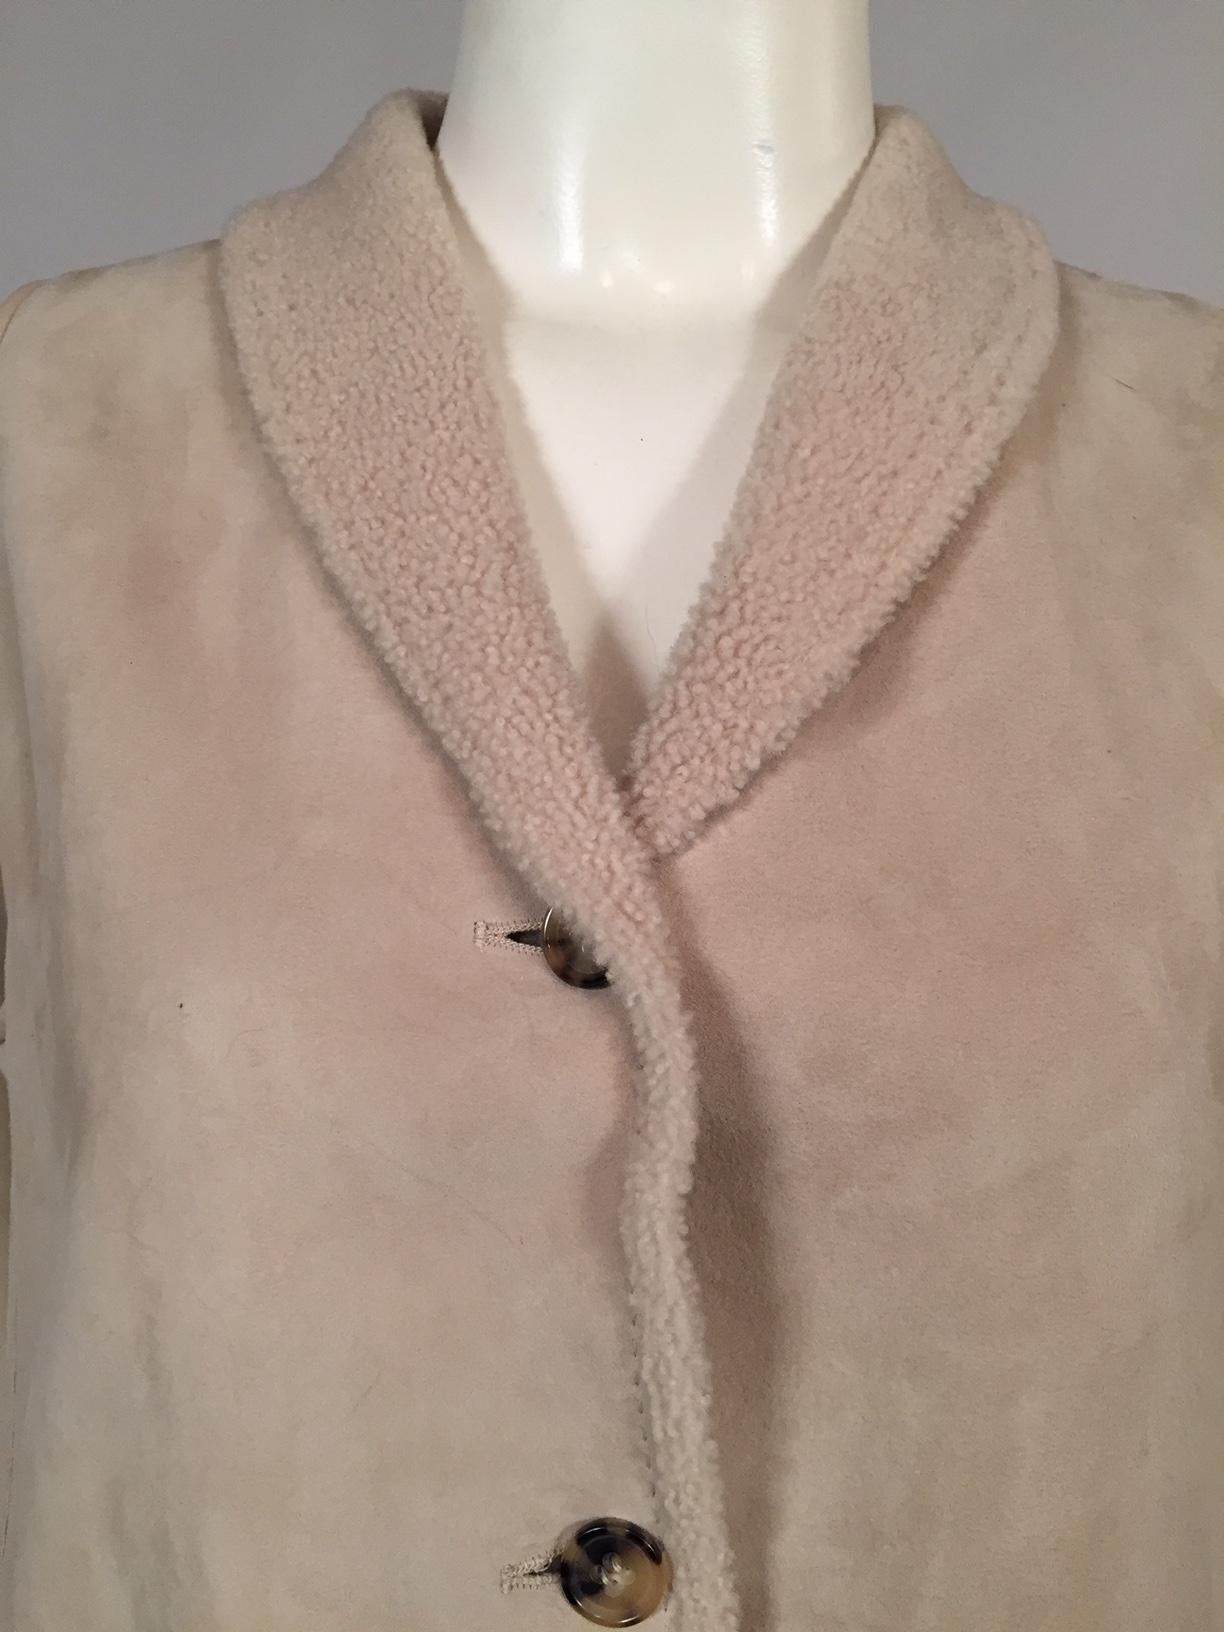 A light weight shearling vest is perfect for layering now and wearing alone when the temperatures begin to warm up. It has a shawl collar, four logo buttons, and there are pockets in the side seams. It is in excellent condition and appears to have